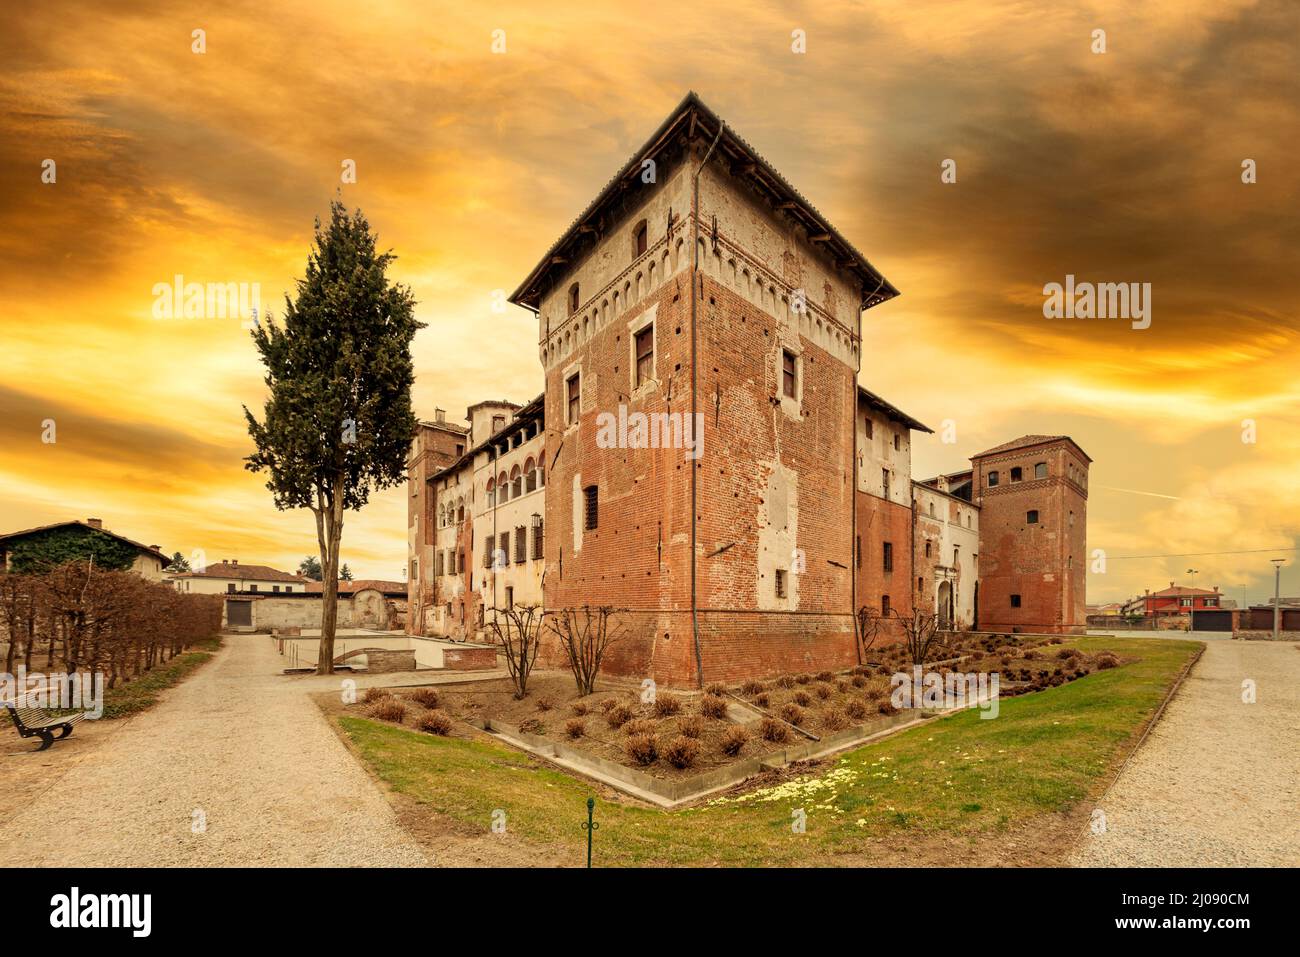 Lagnasco, Cuneo, Italy - March 16, 2022: The Castles of the Marquises Tapparelli D'Azeglio (11th to 18th century) with sky with colored sunset clouds Stock Photo